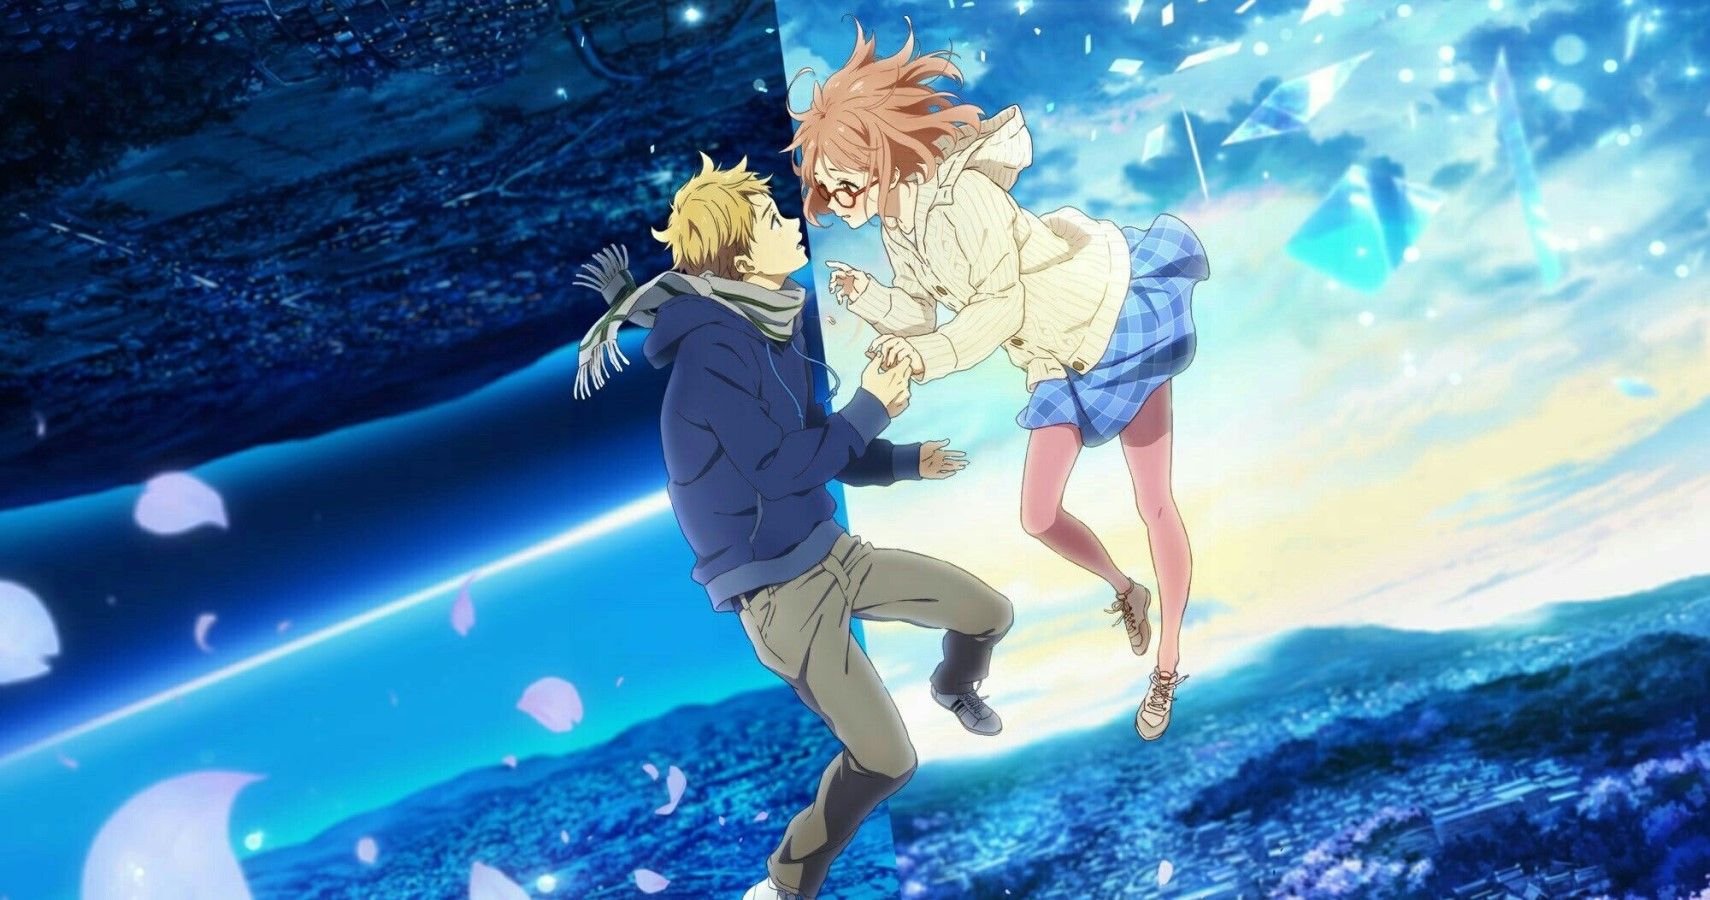 Why are you running?! [Beyond the Boundary] : r/anime